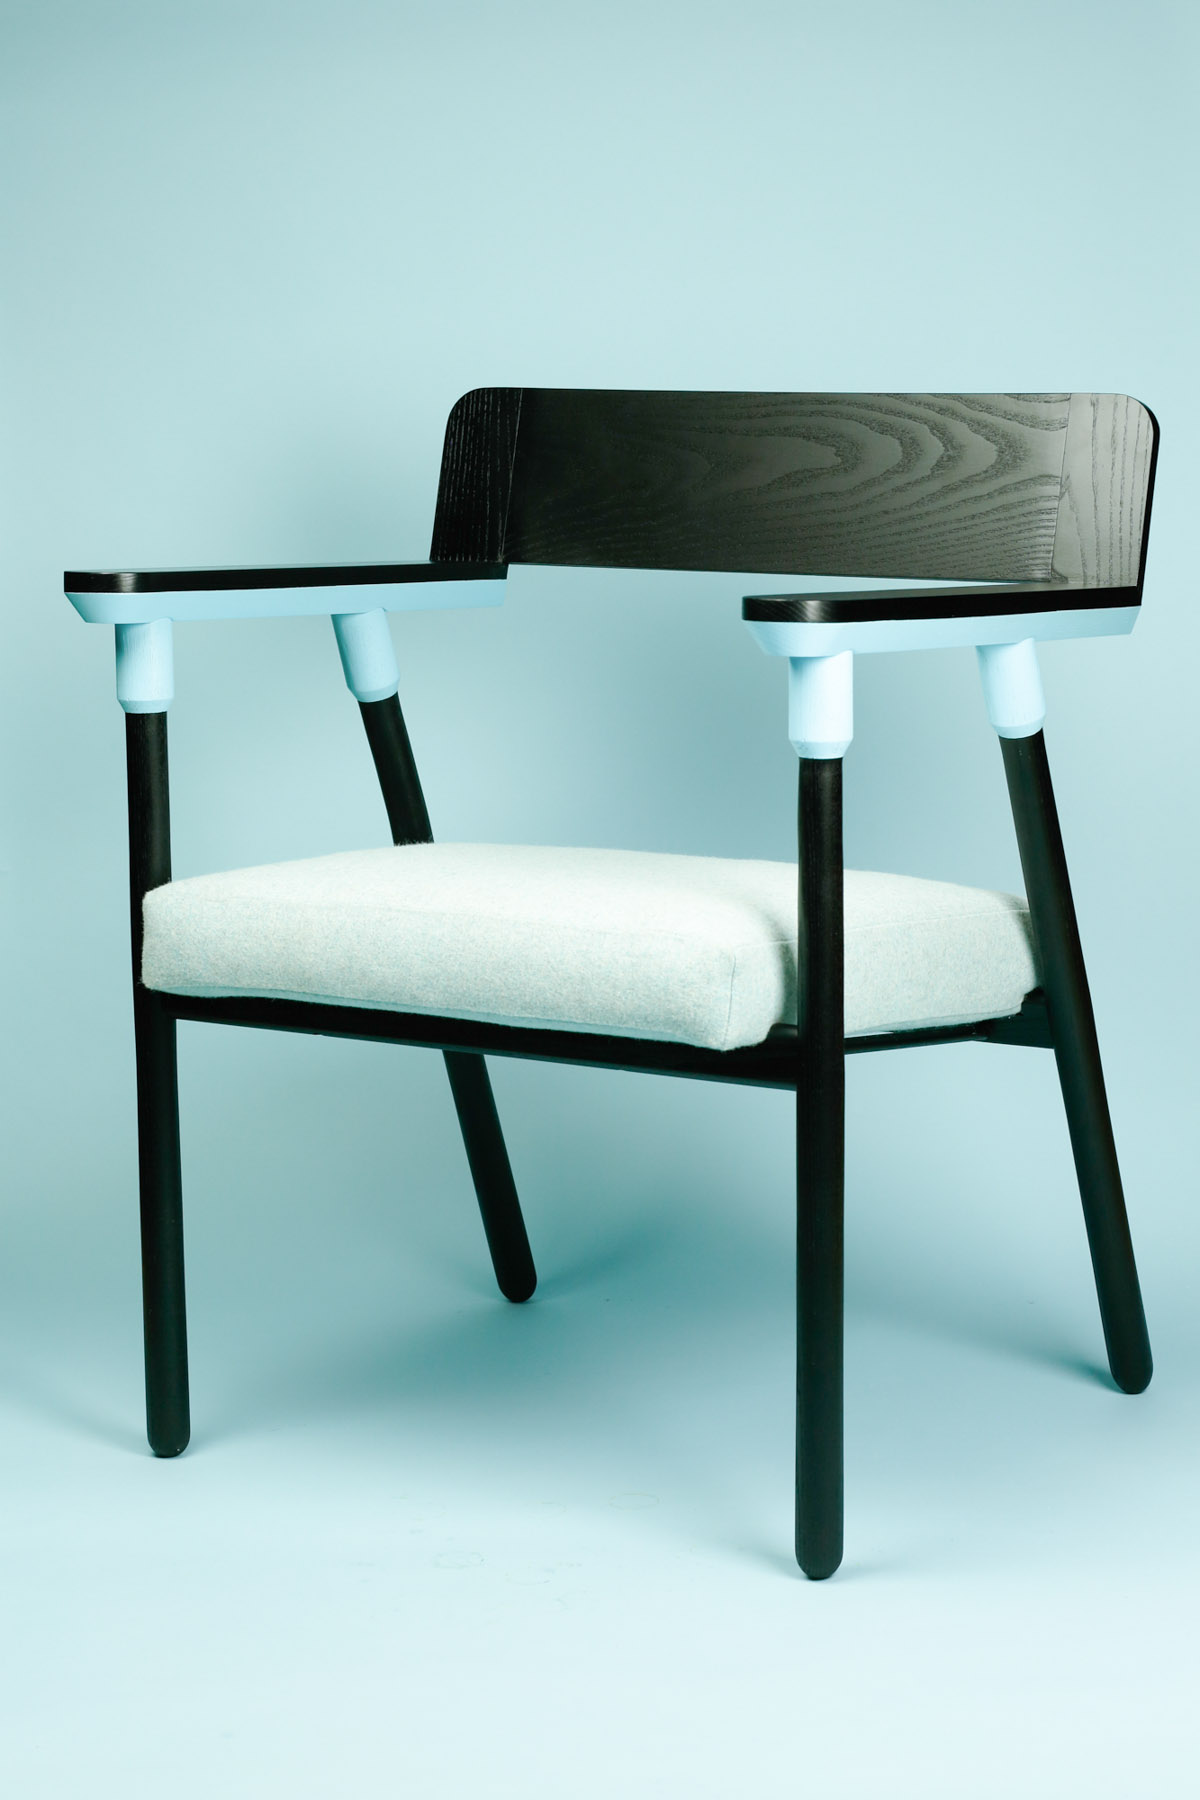 Two New Armchairs From Dave Flynn